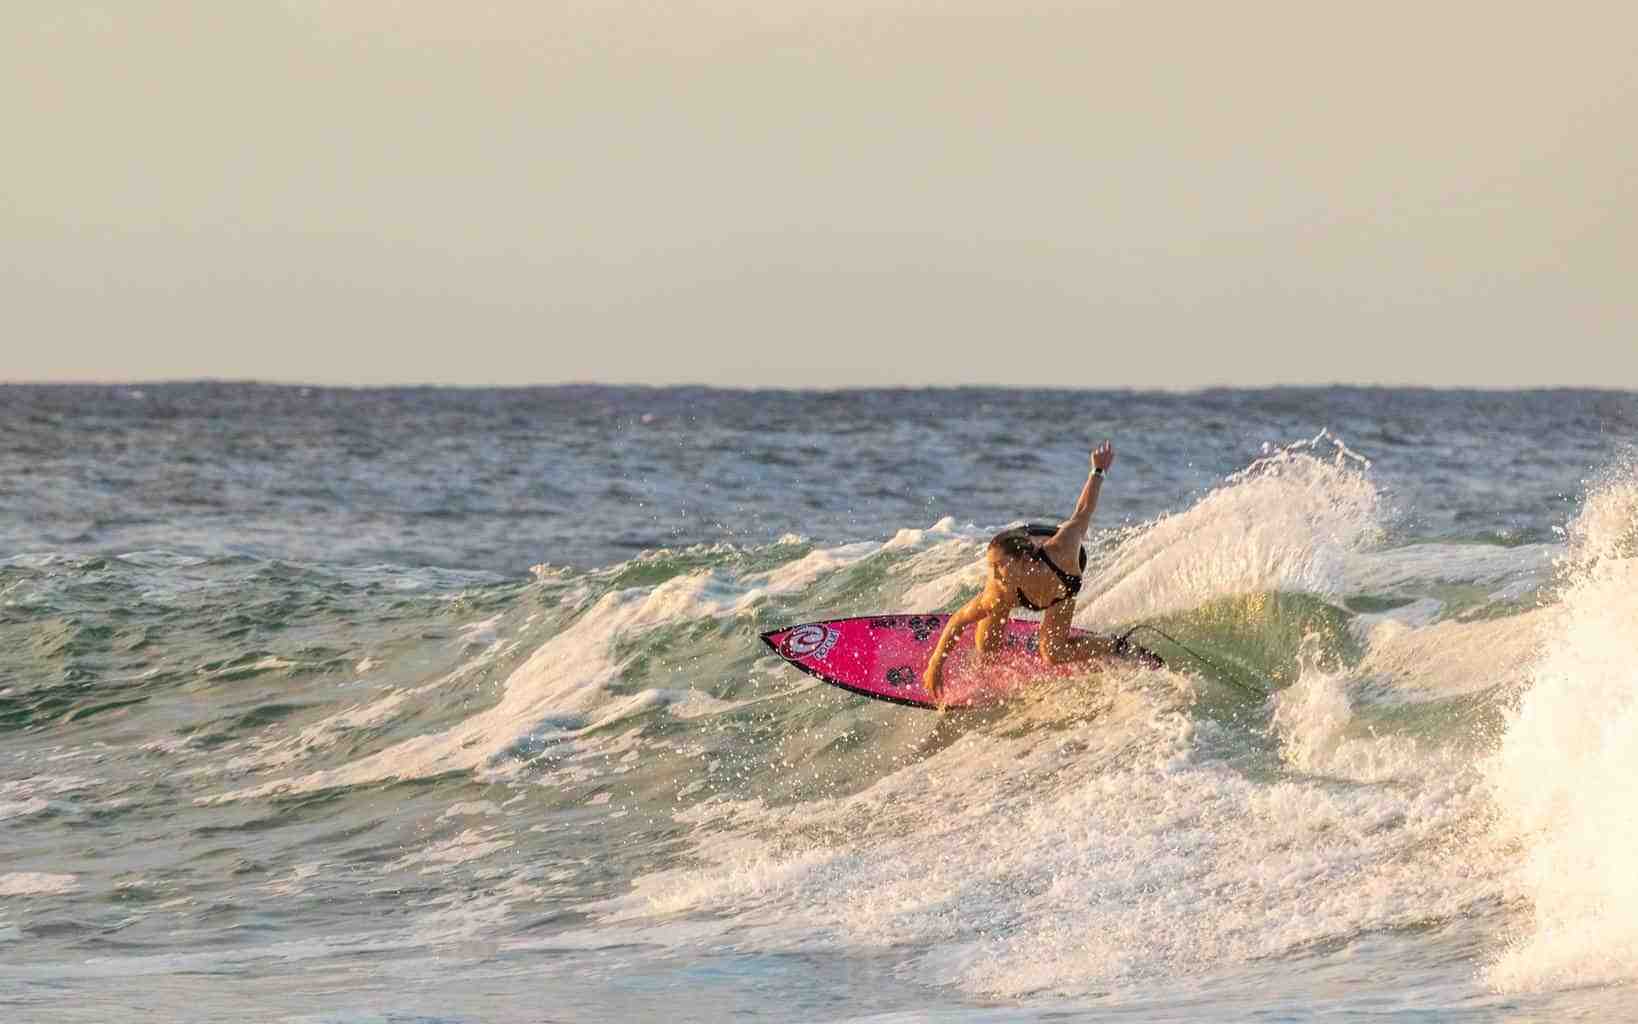 How many calories do you burn with an hour of surfing?